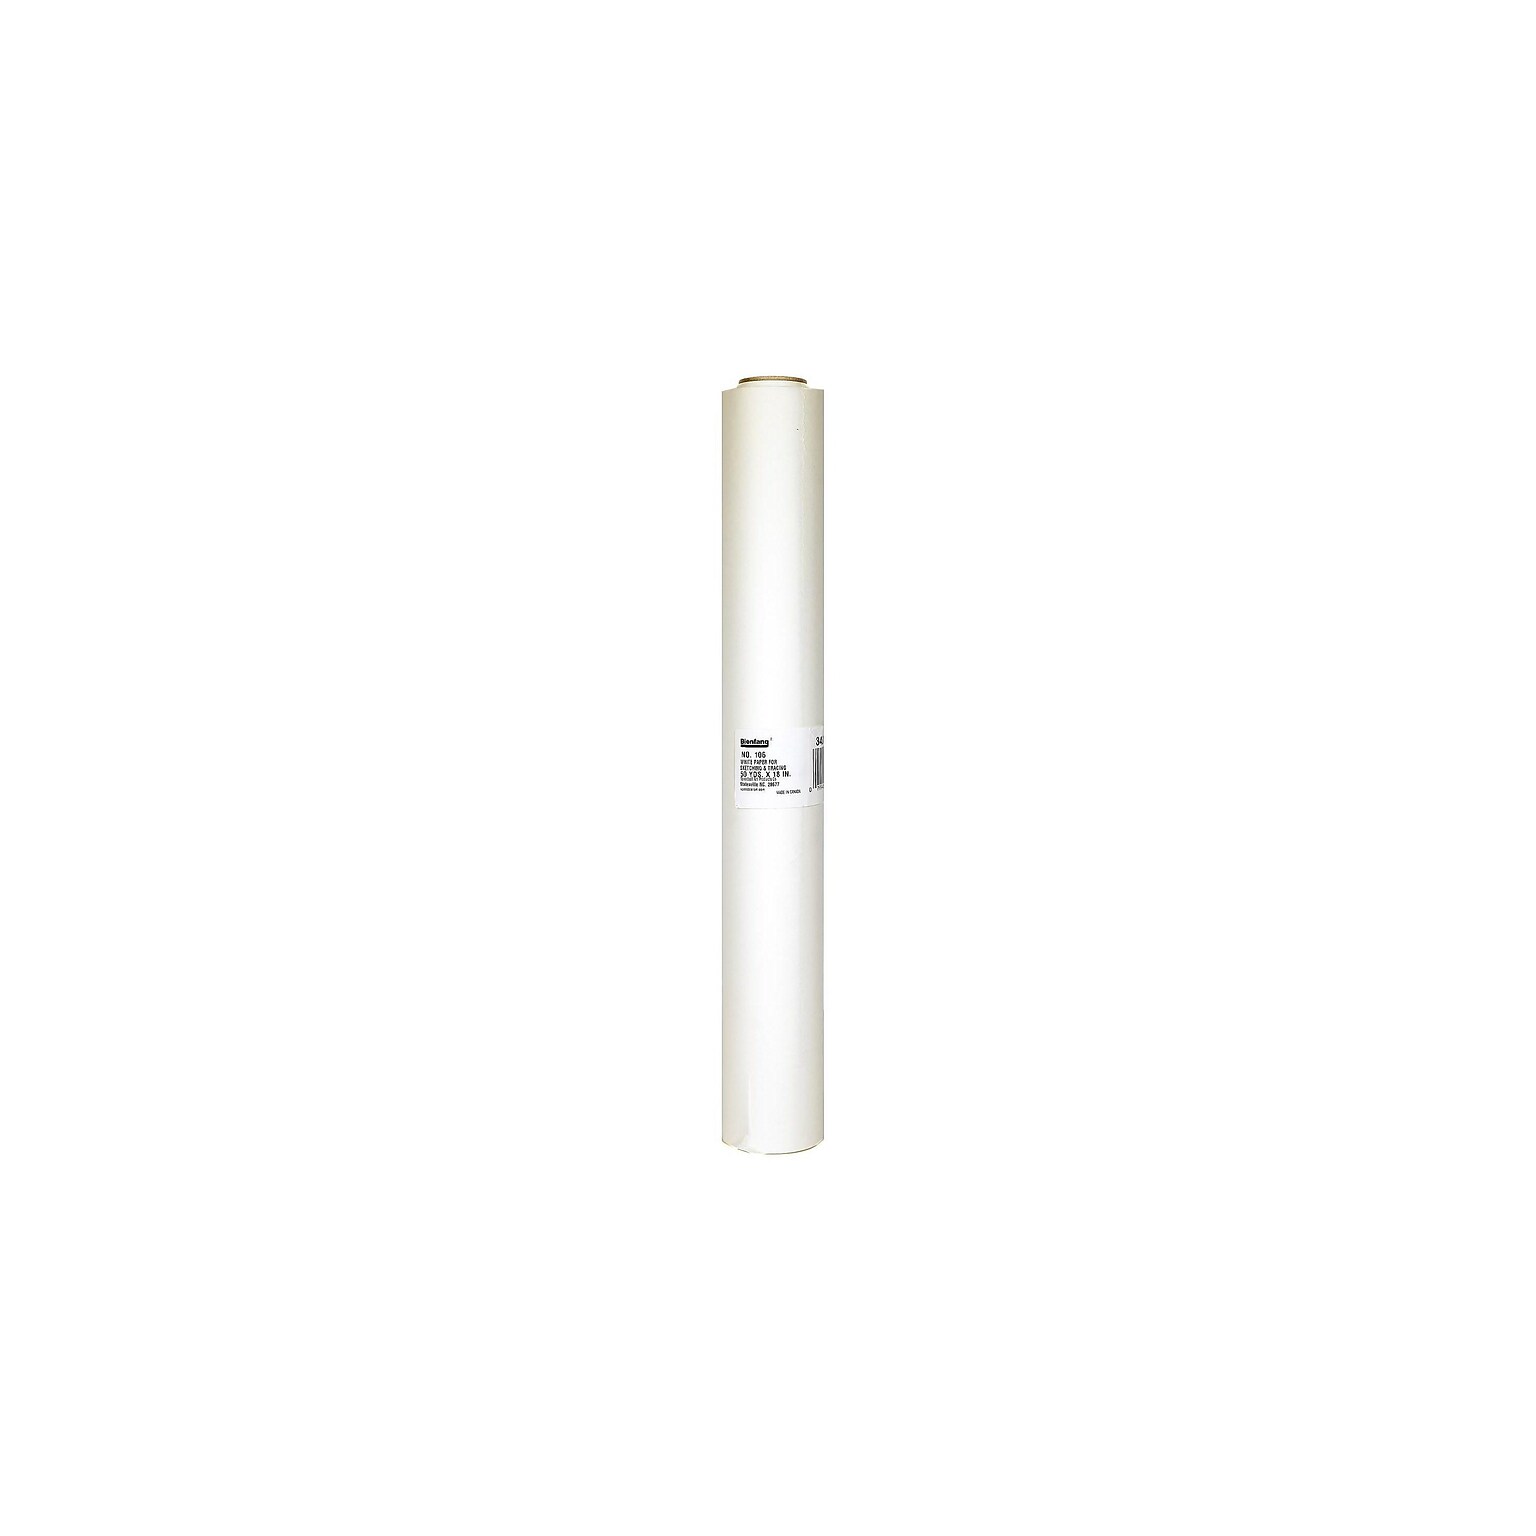 Bienfang Sketching & Tracing Paper Roll, 18W x 150L, White (81913)